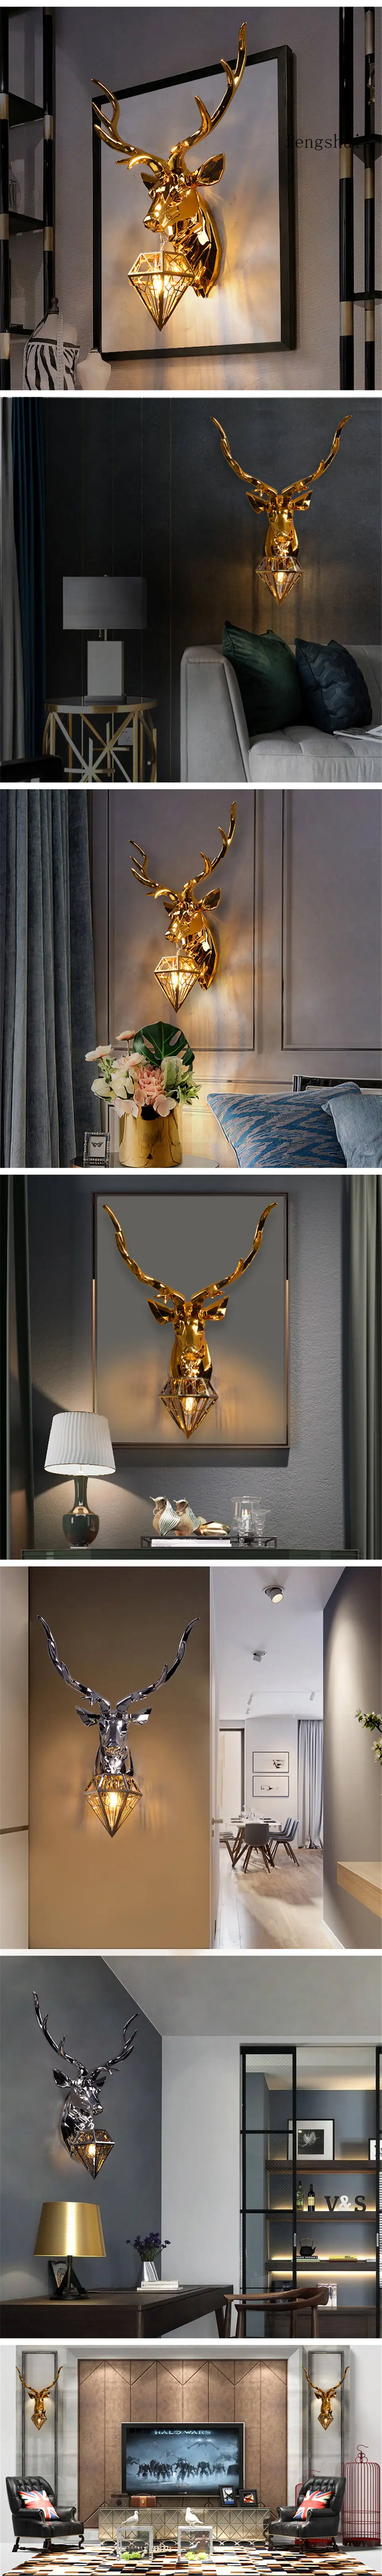 Modern Antler LED Wall Lamp Deer Lamp Nordic Wall Lamps for Bedroom Indoor Lighting Home Wall Lights Home Decor Wall Sconce Lamp plug in wall lamp